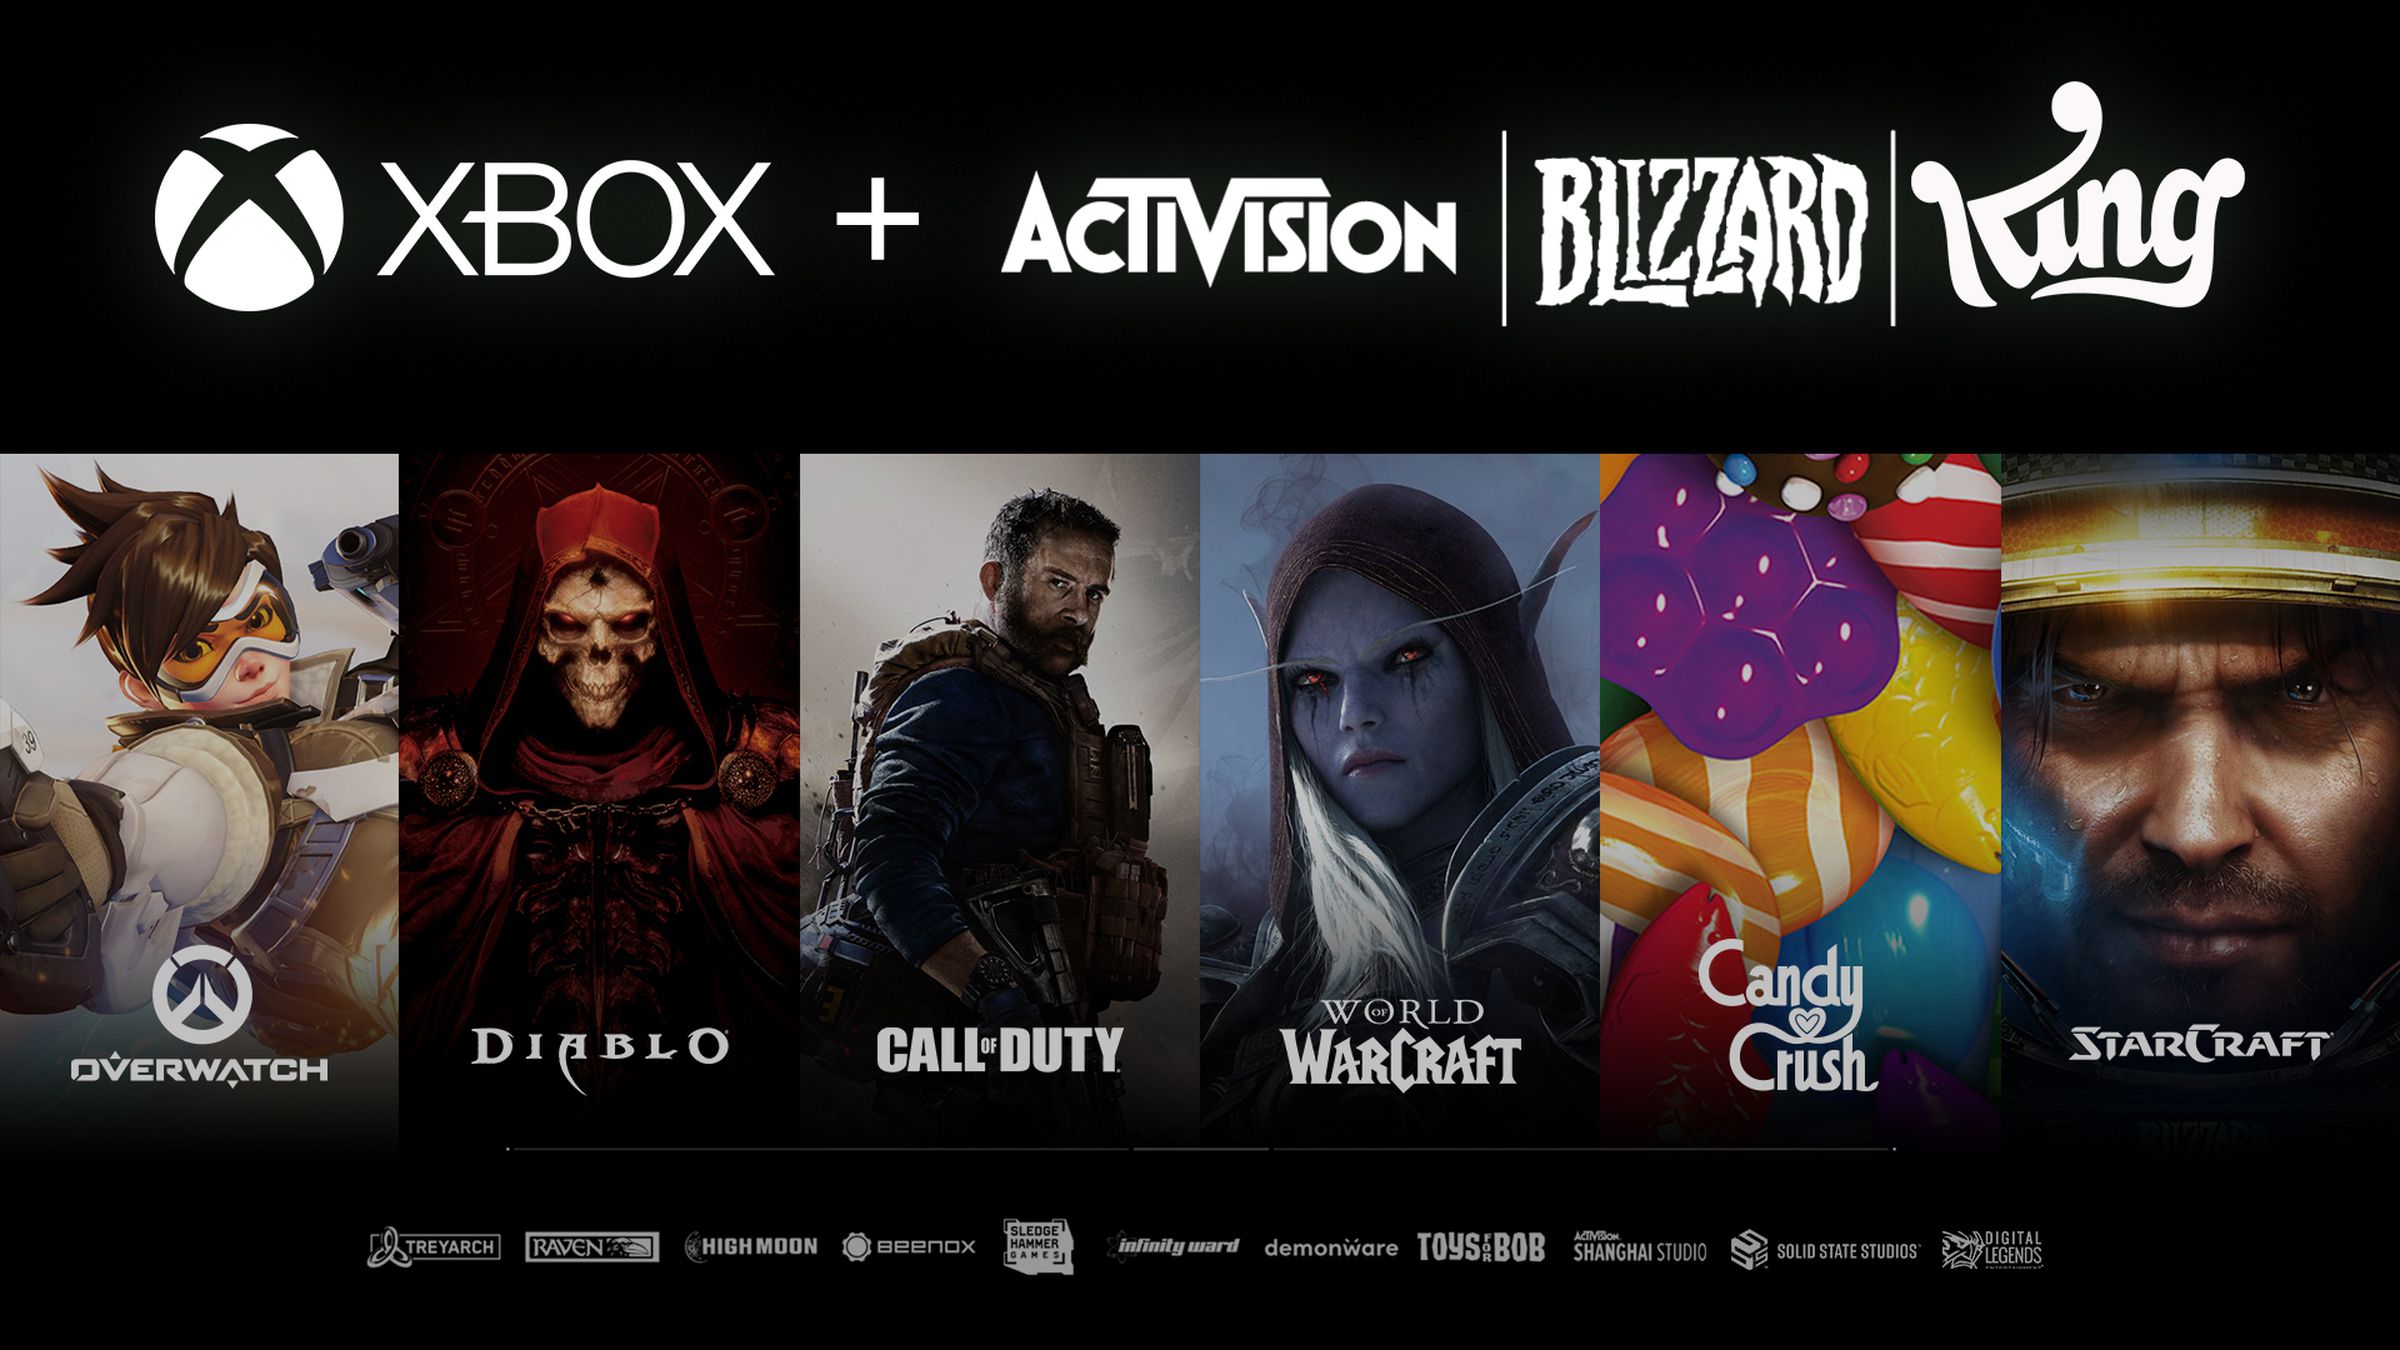 Overwatch, Diablo, and Call of Duty will all be on Xbox Game Pass.